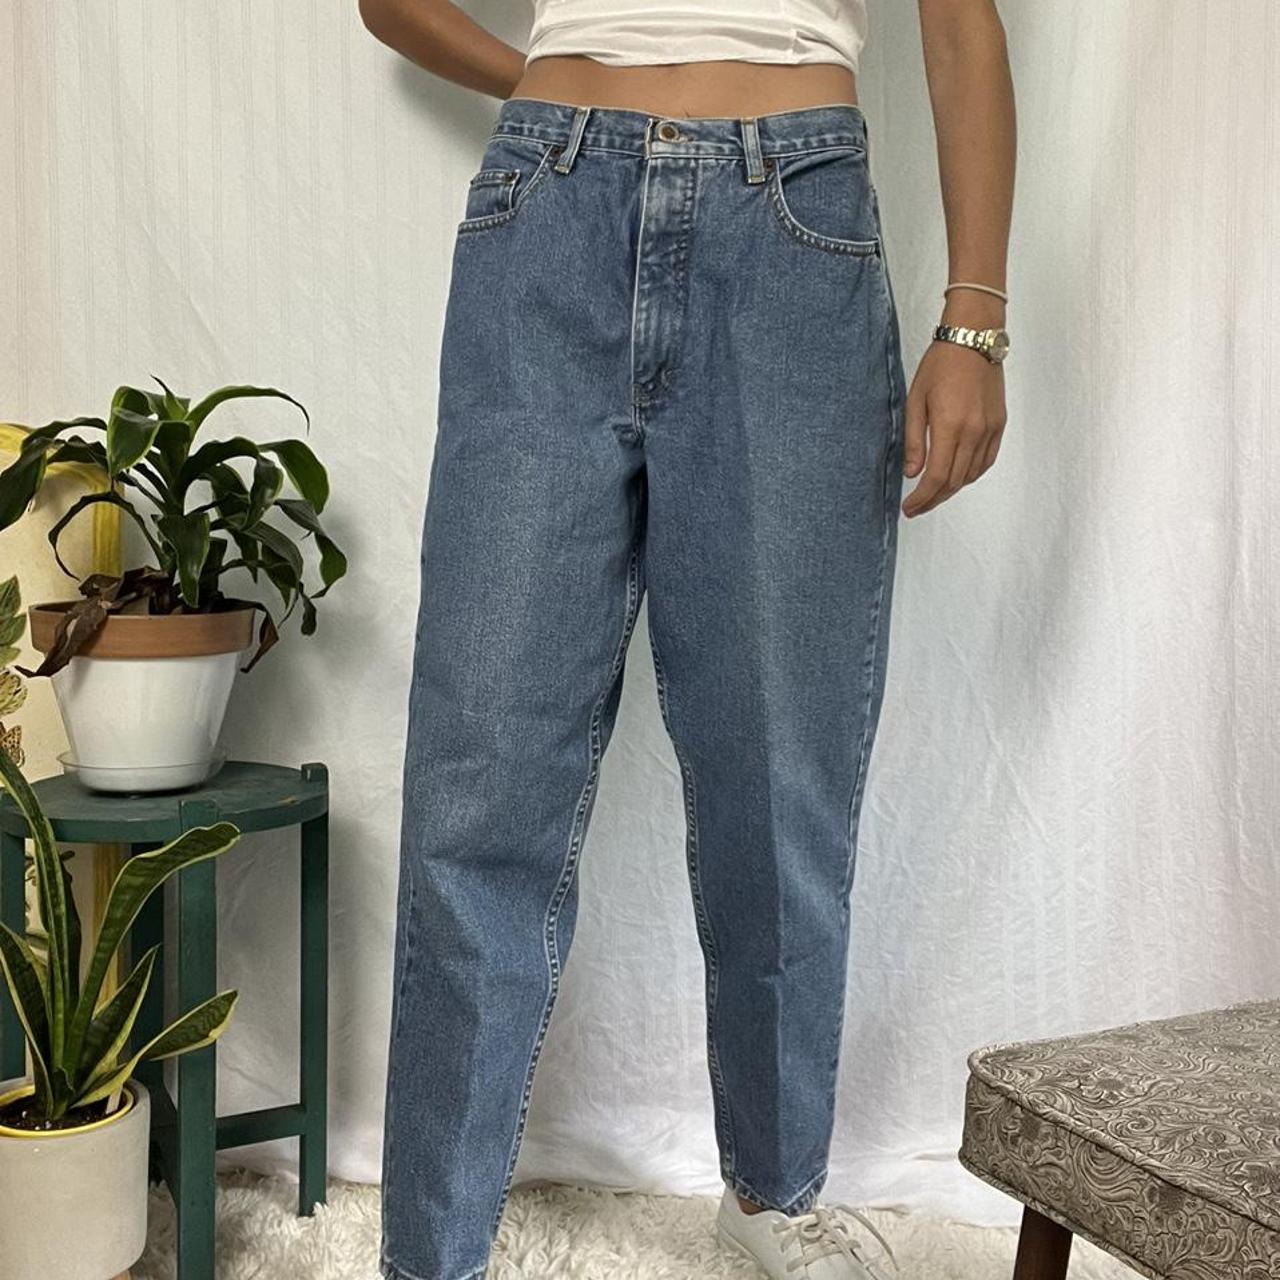 Vintage High-waisted Mom Jeans Relaxed Fit by Route... - Depop